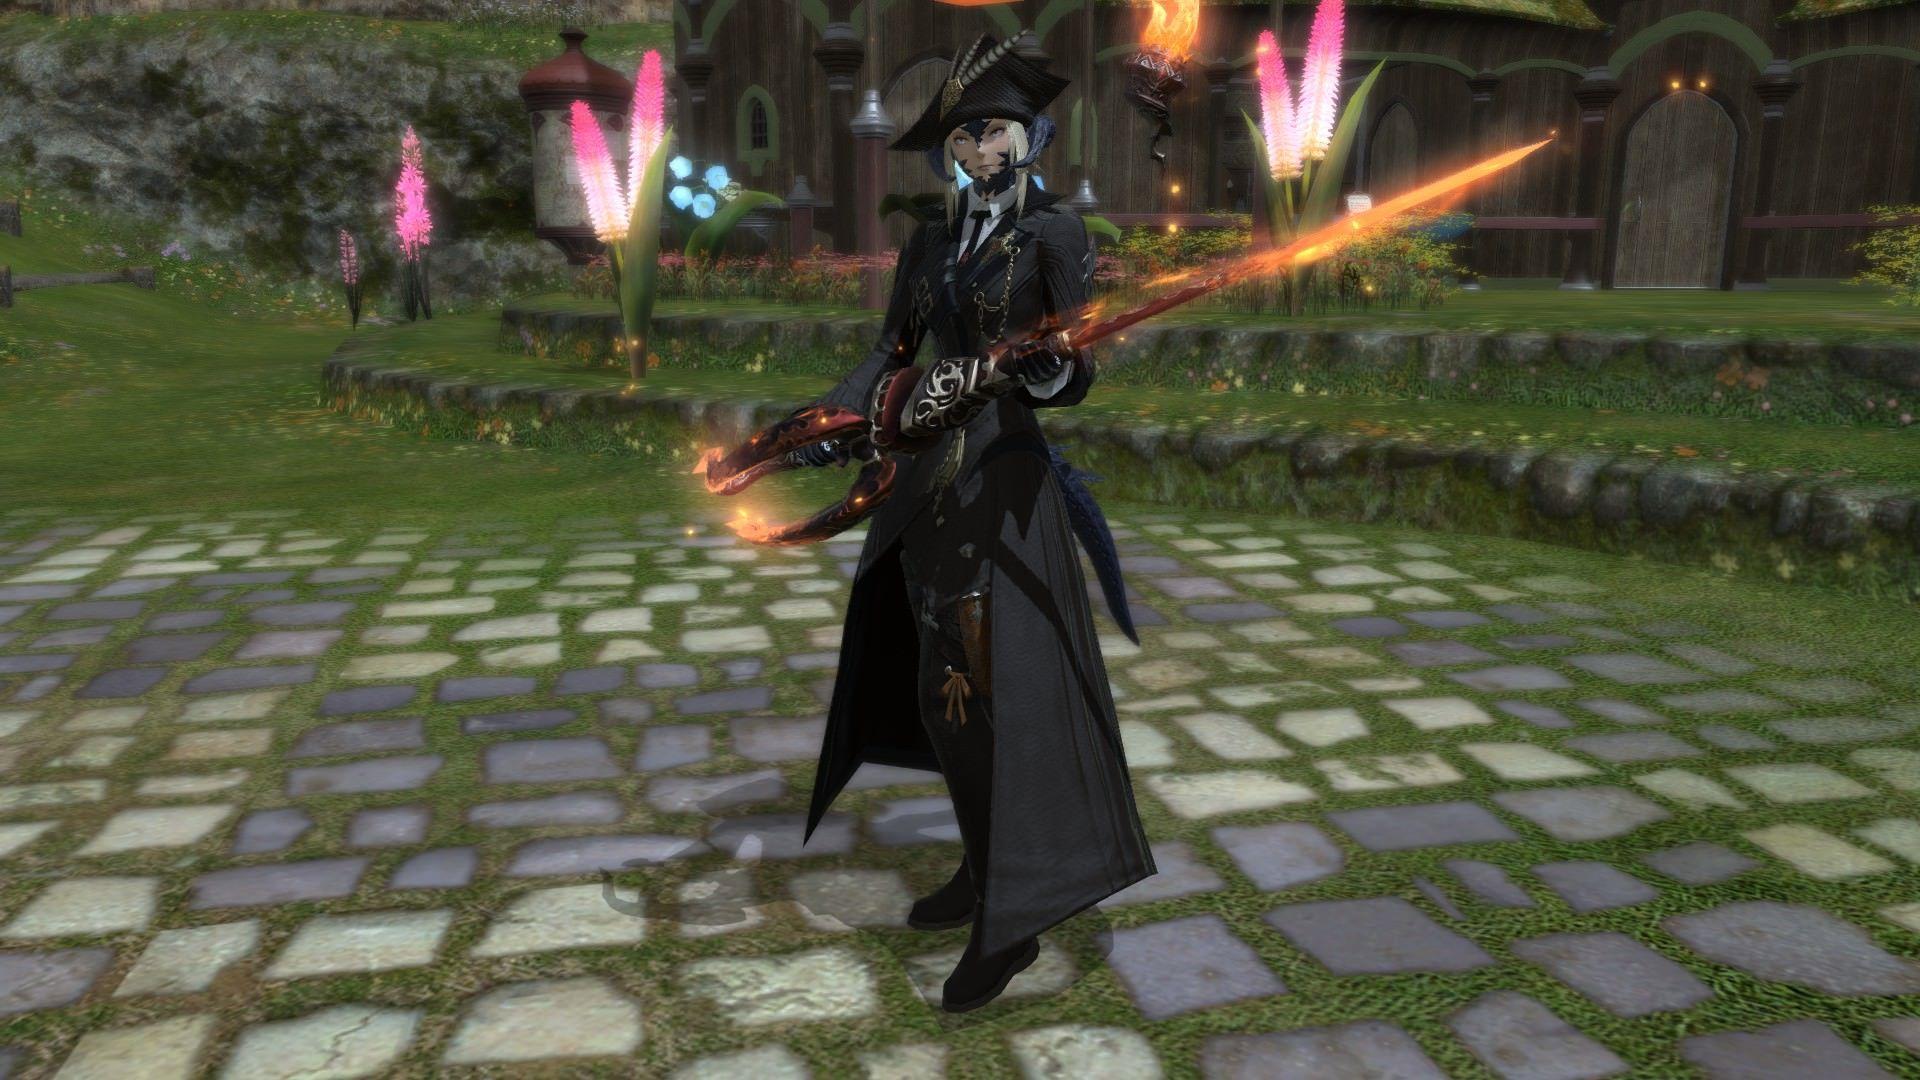 I tried cosplaying Lady Maria from Bloodborne in FFXIV, what do you